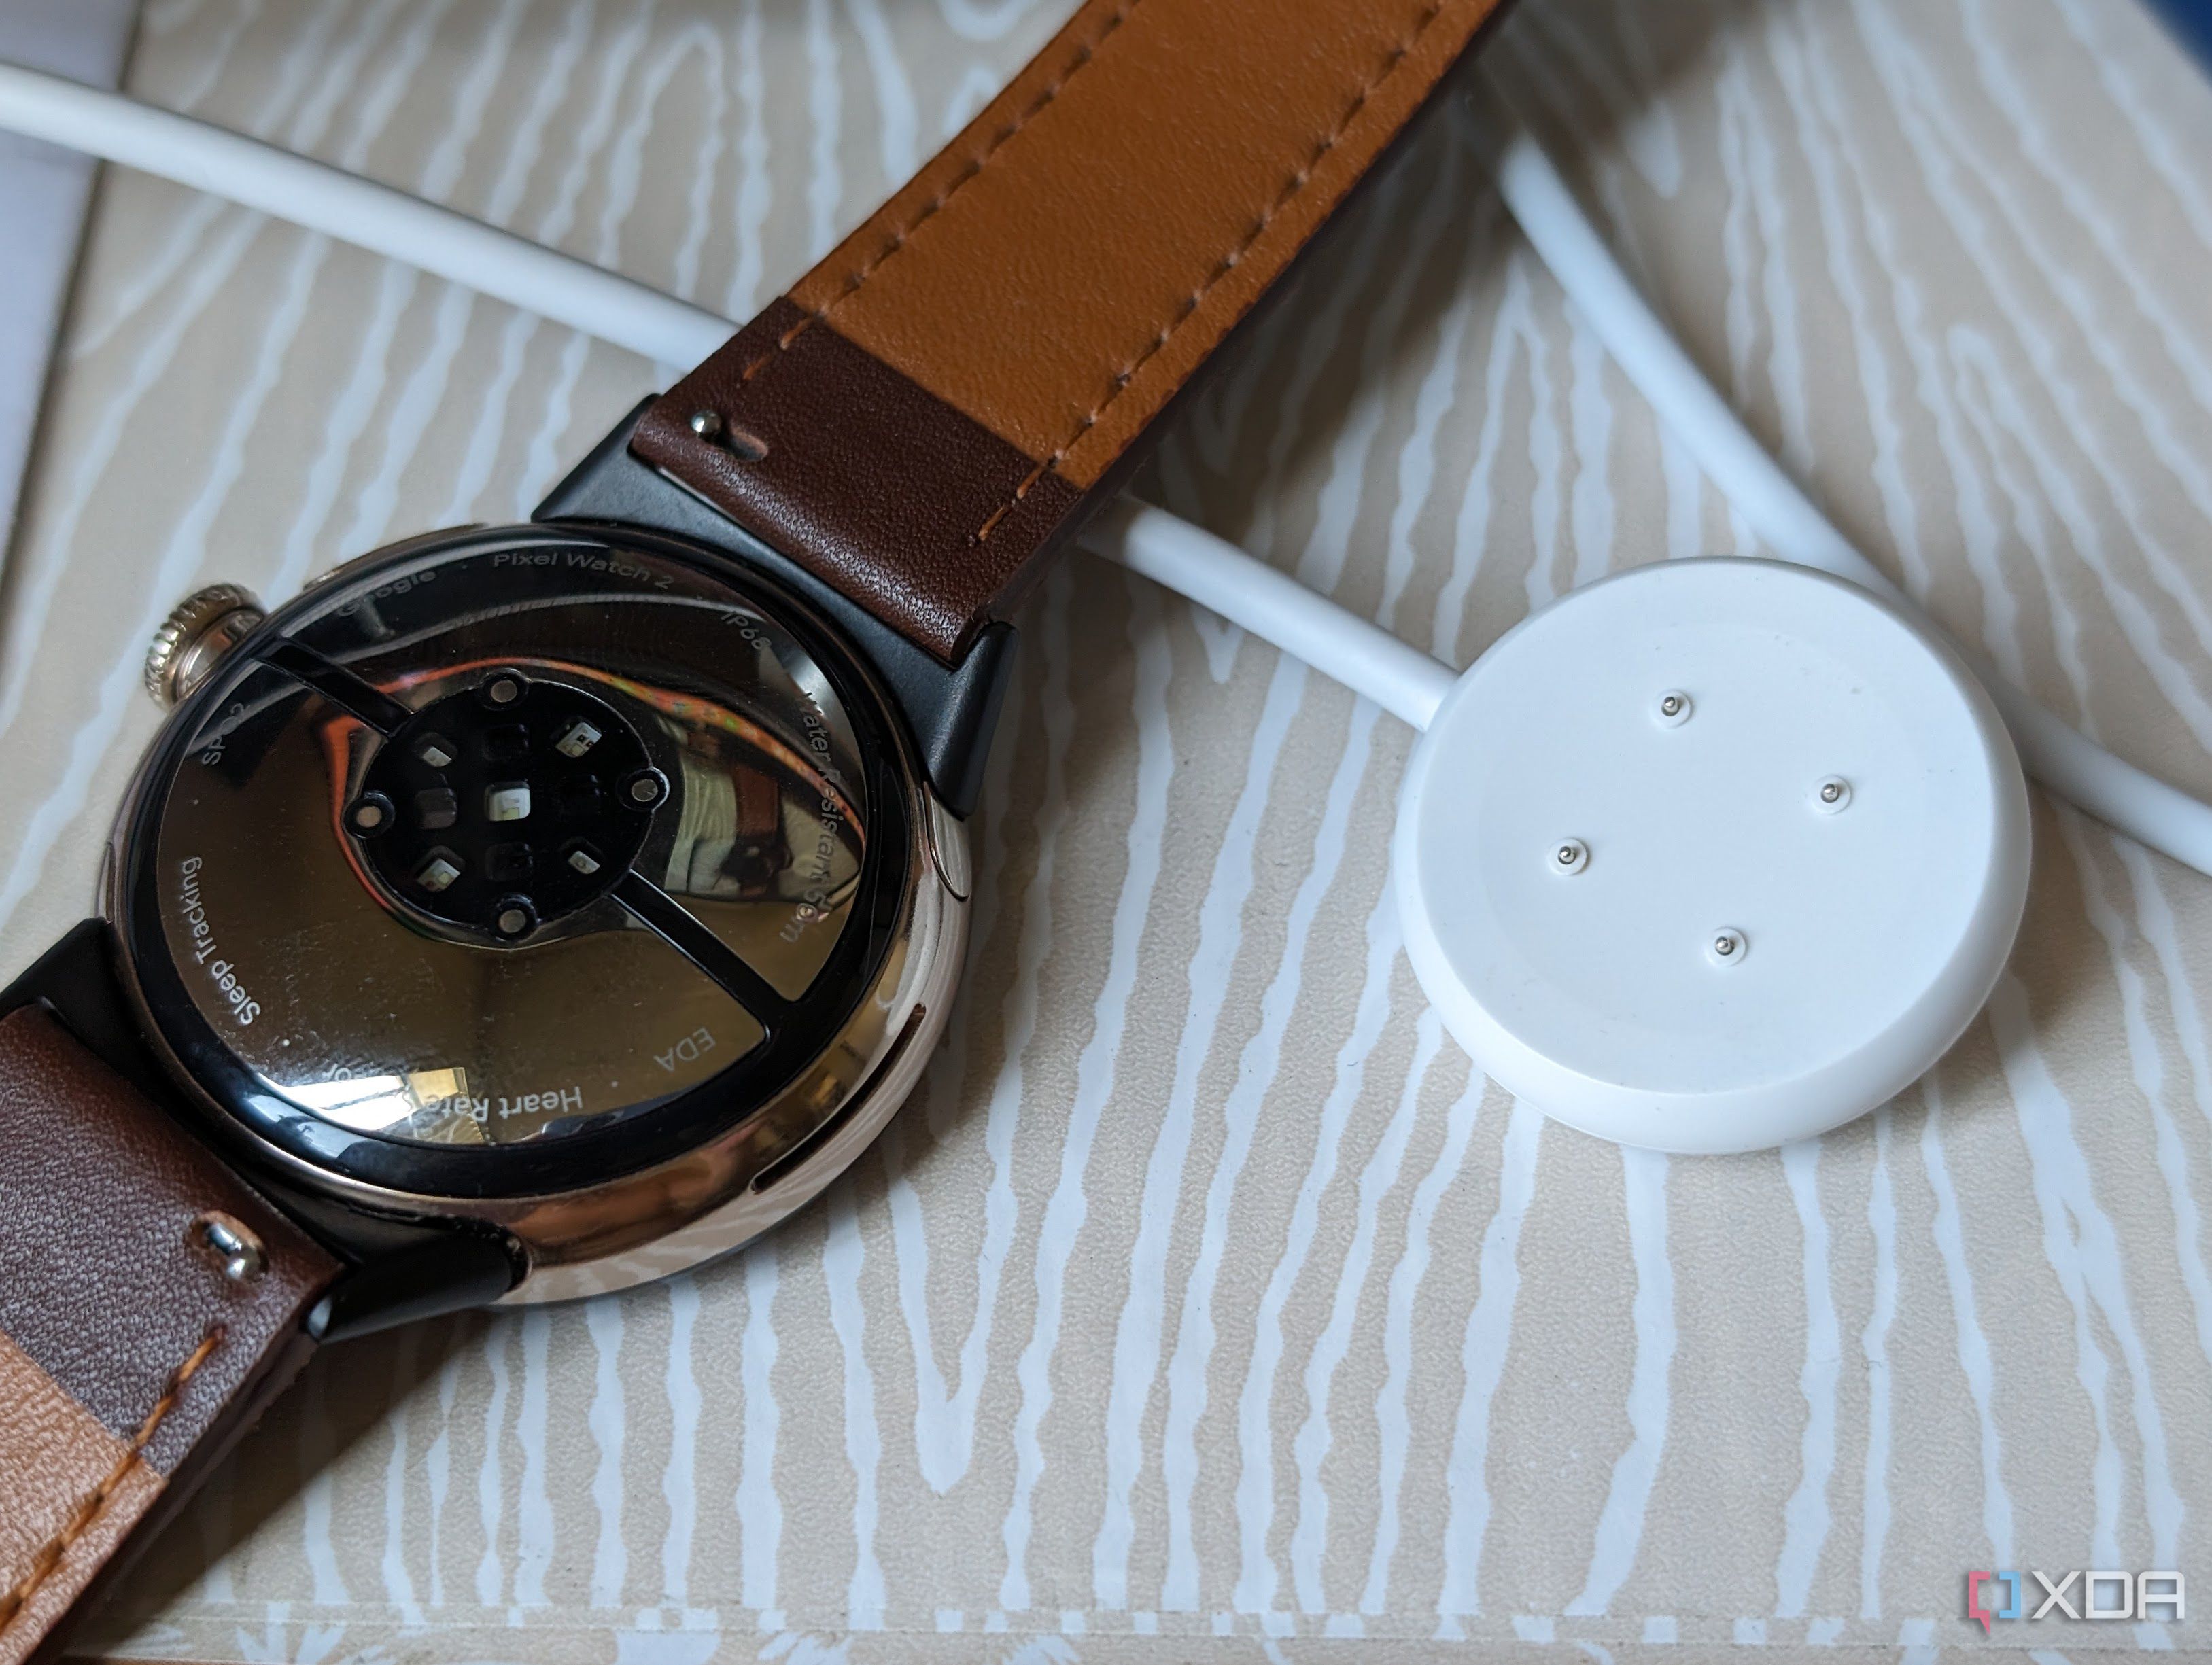 The Pixel Watch 2 and its new charger.